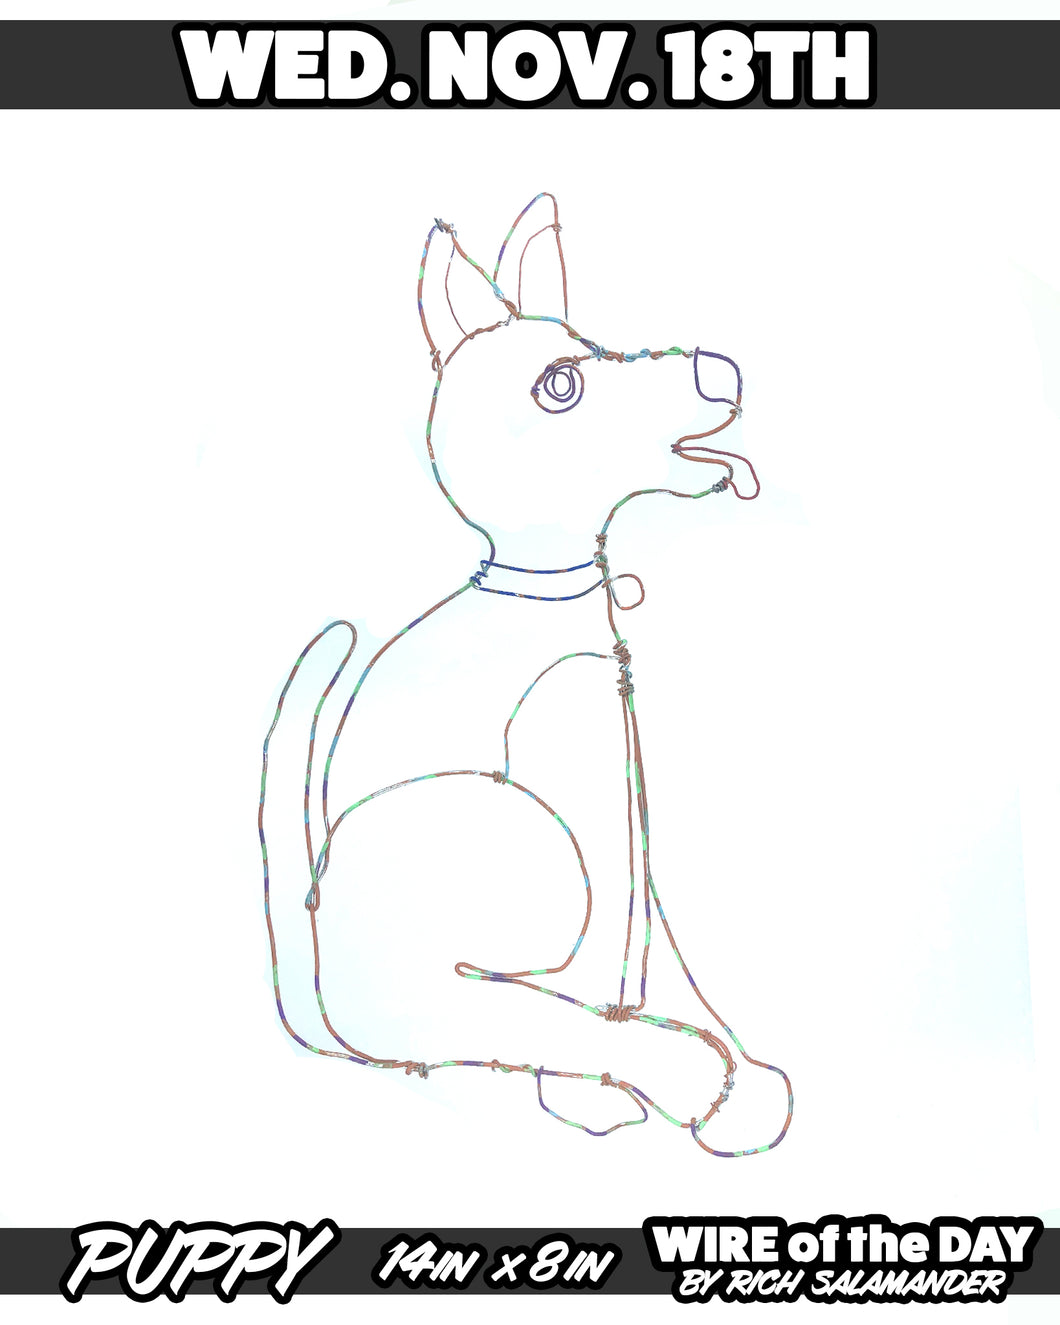 WIRE of the DAY PUPPY